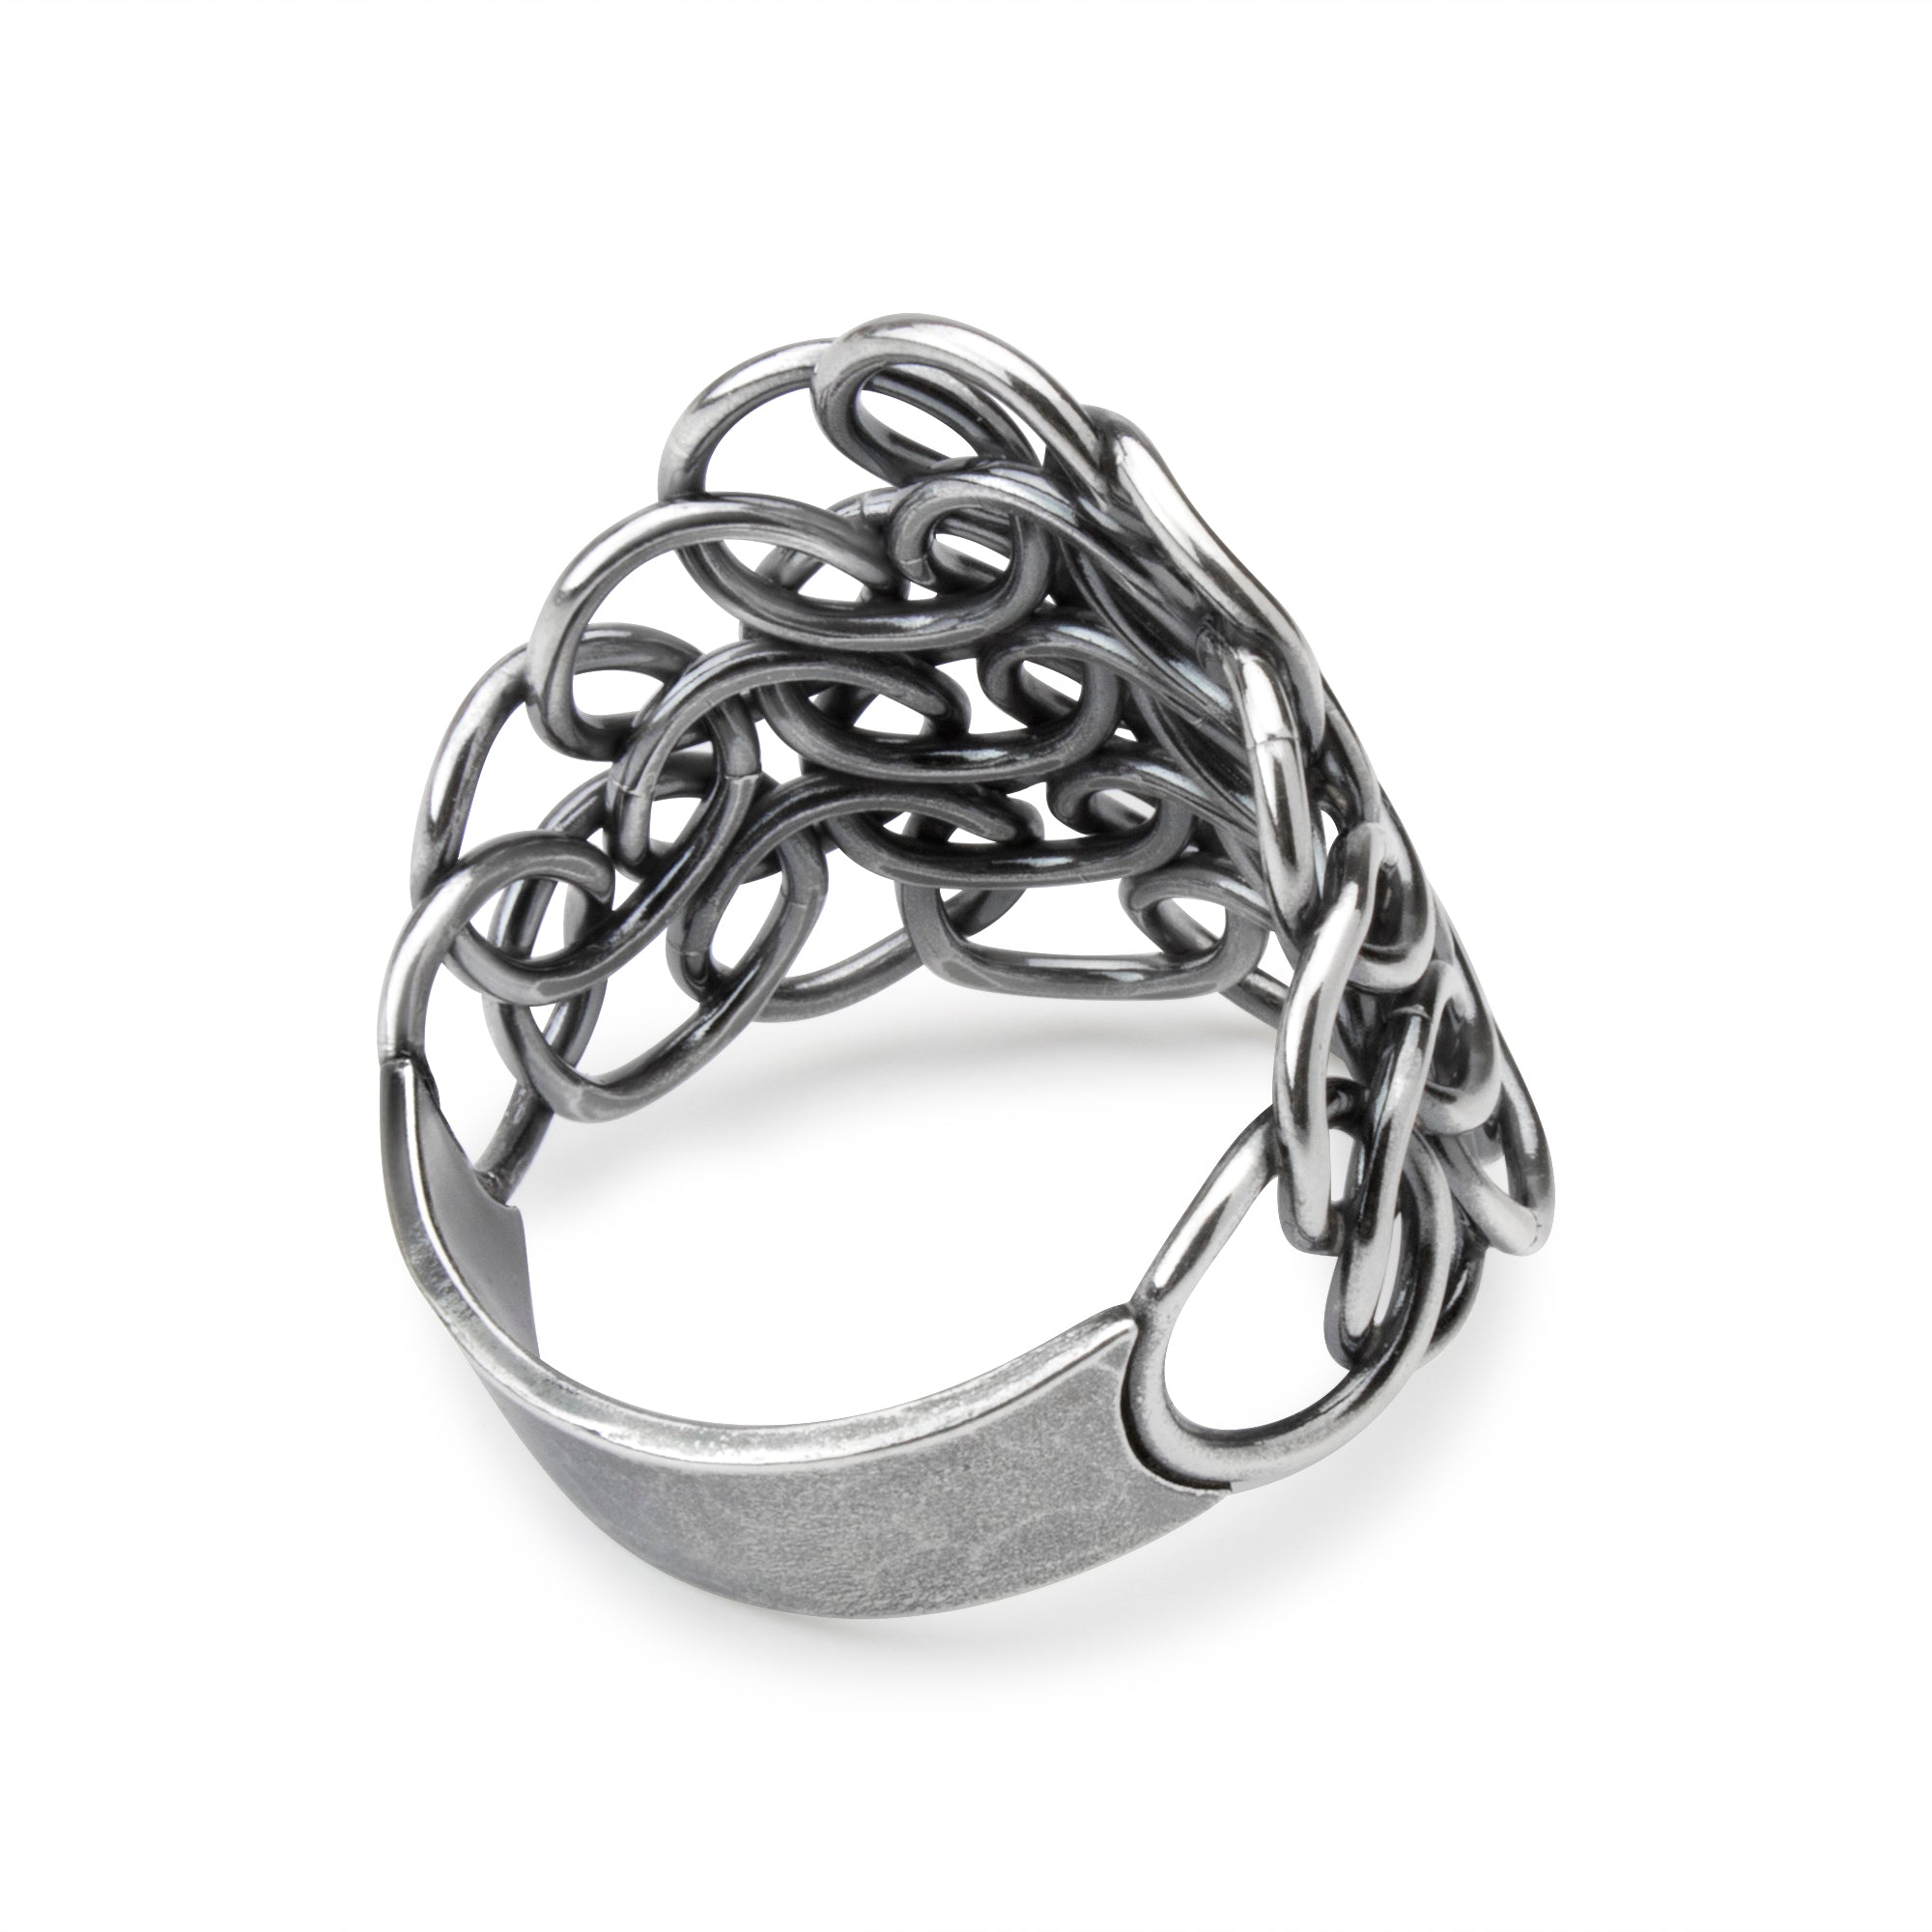 Fused Armorer's Chainmaille Statement Ring – Handmade in the USA